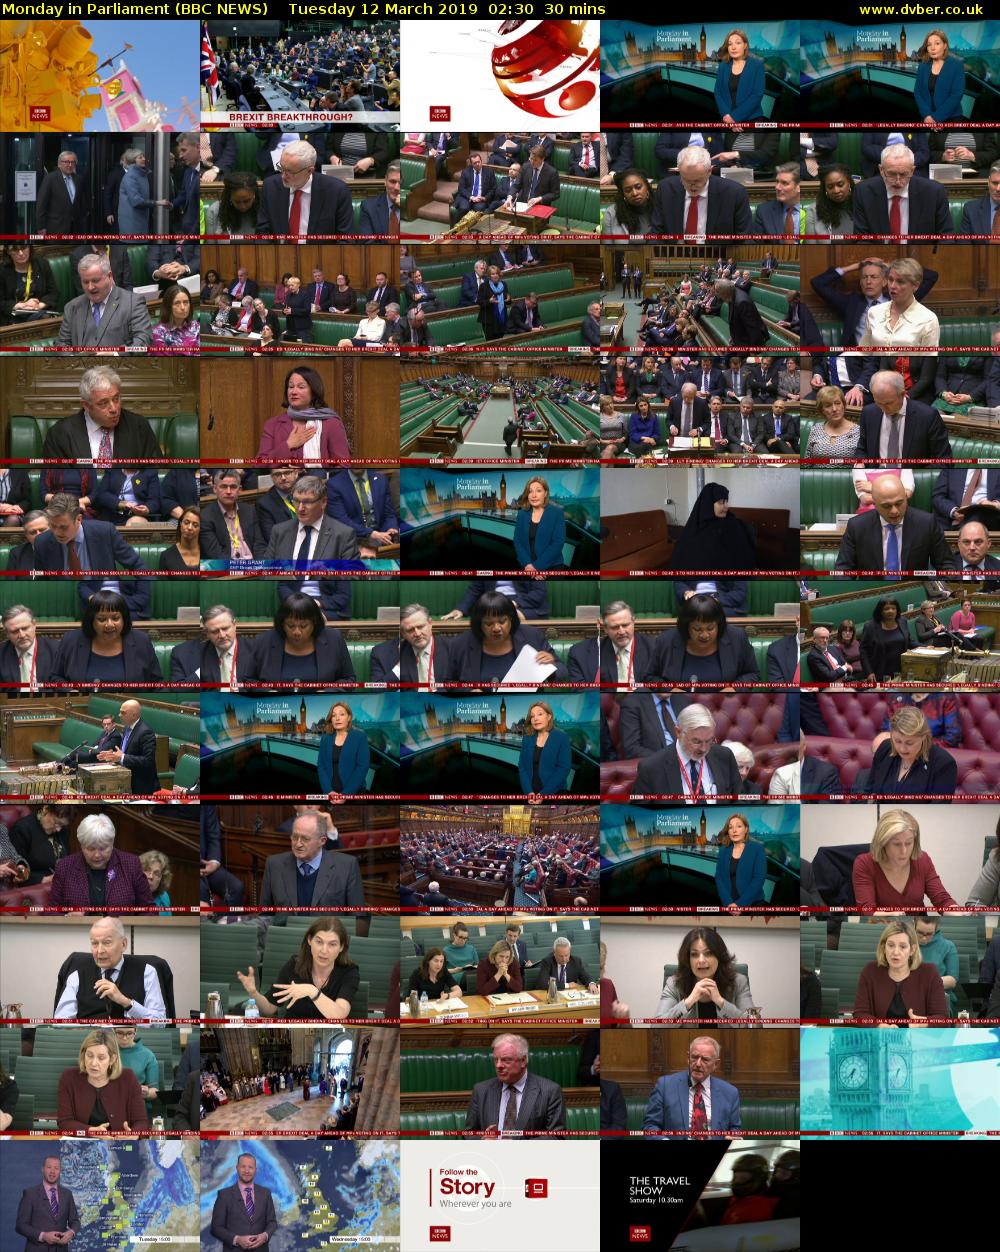 Monday in Parliament (BBC NEWS) Tuesday 12 March 2019 02:30 - 03:00